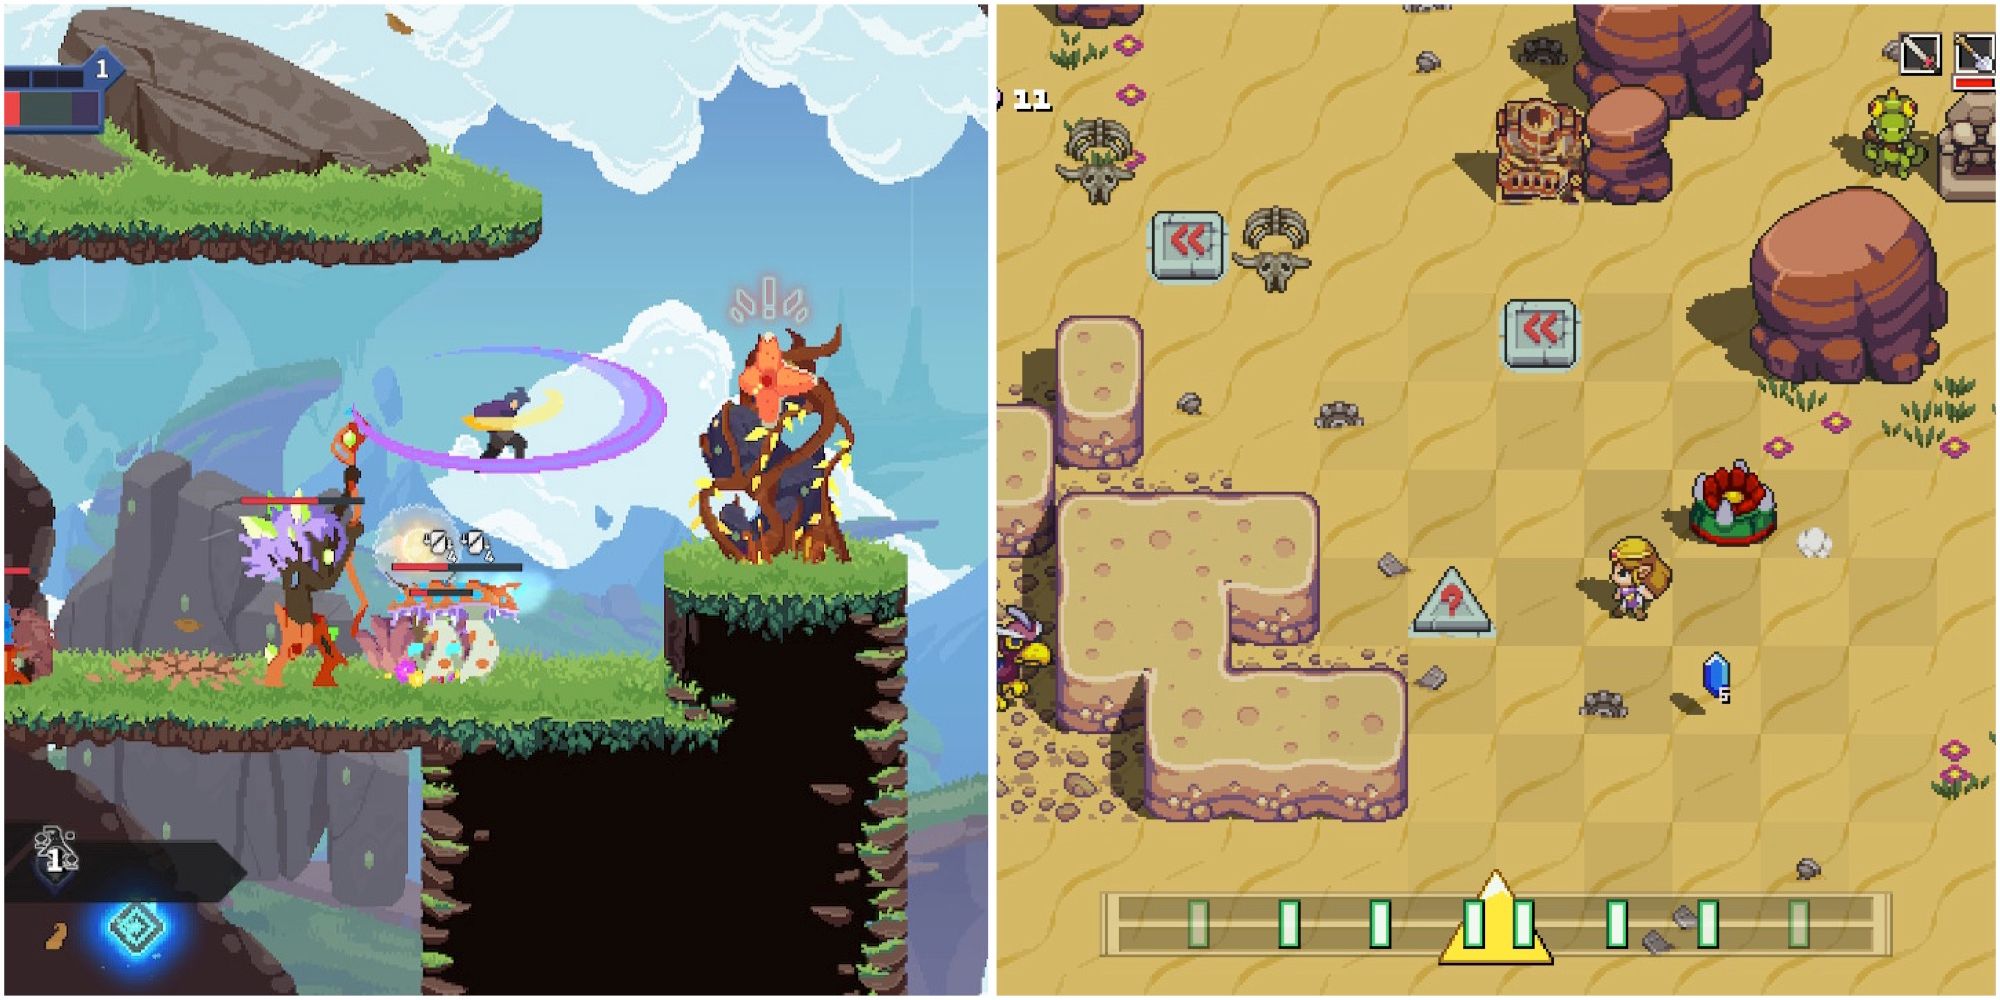 Fighting enemies in Astral Ascent and exploring a level in Cadence Of Hyrule